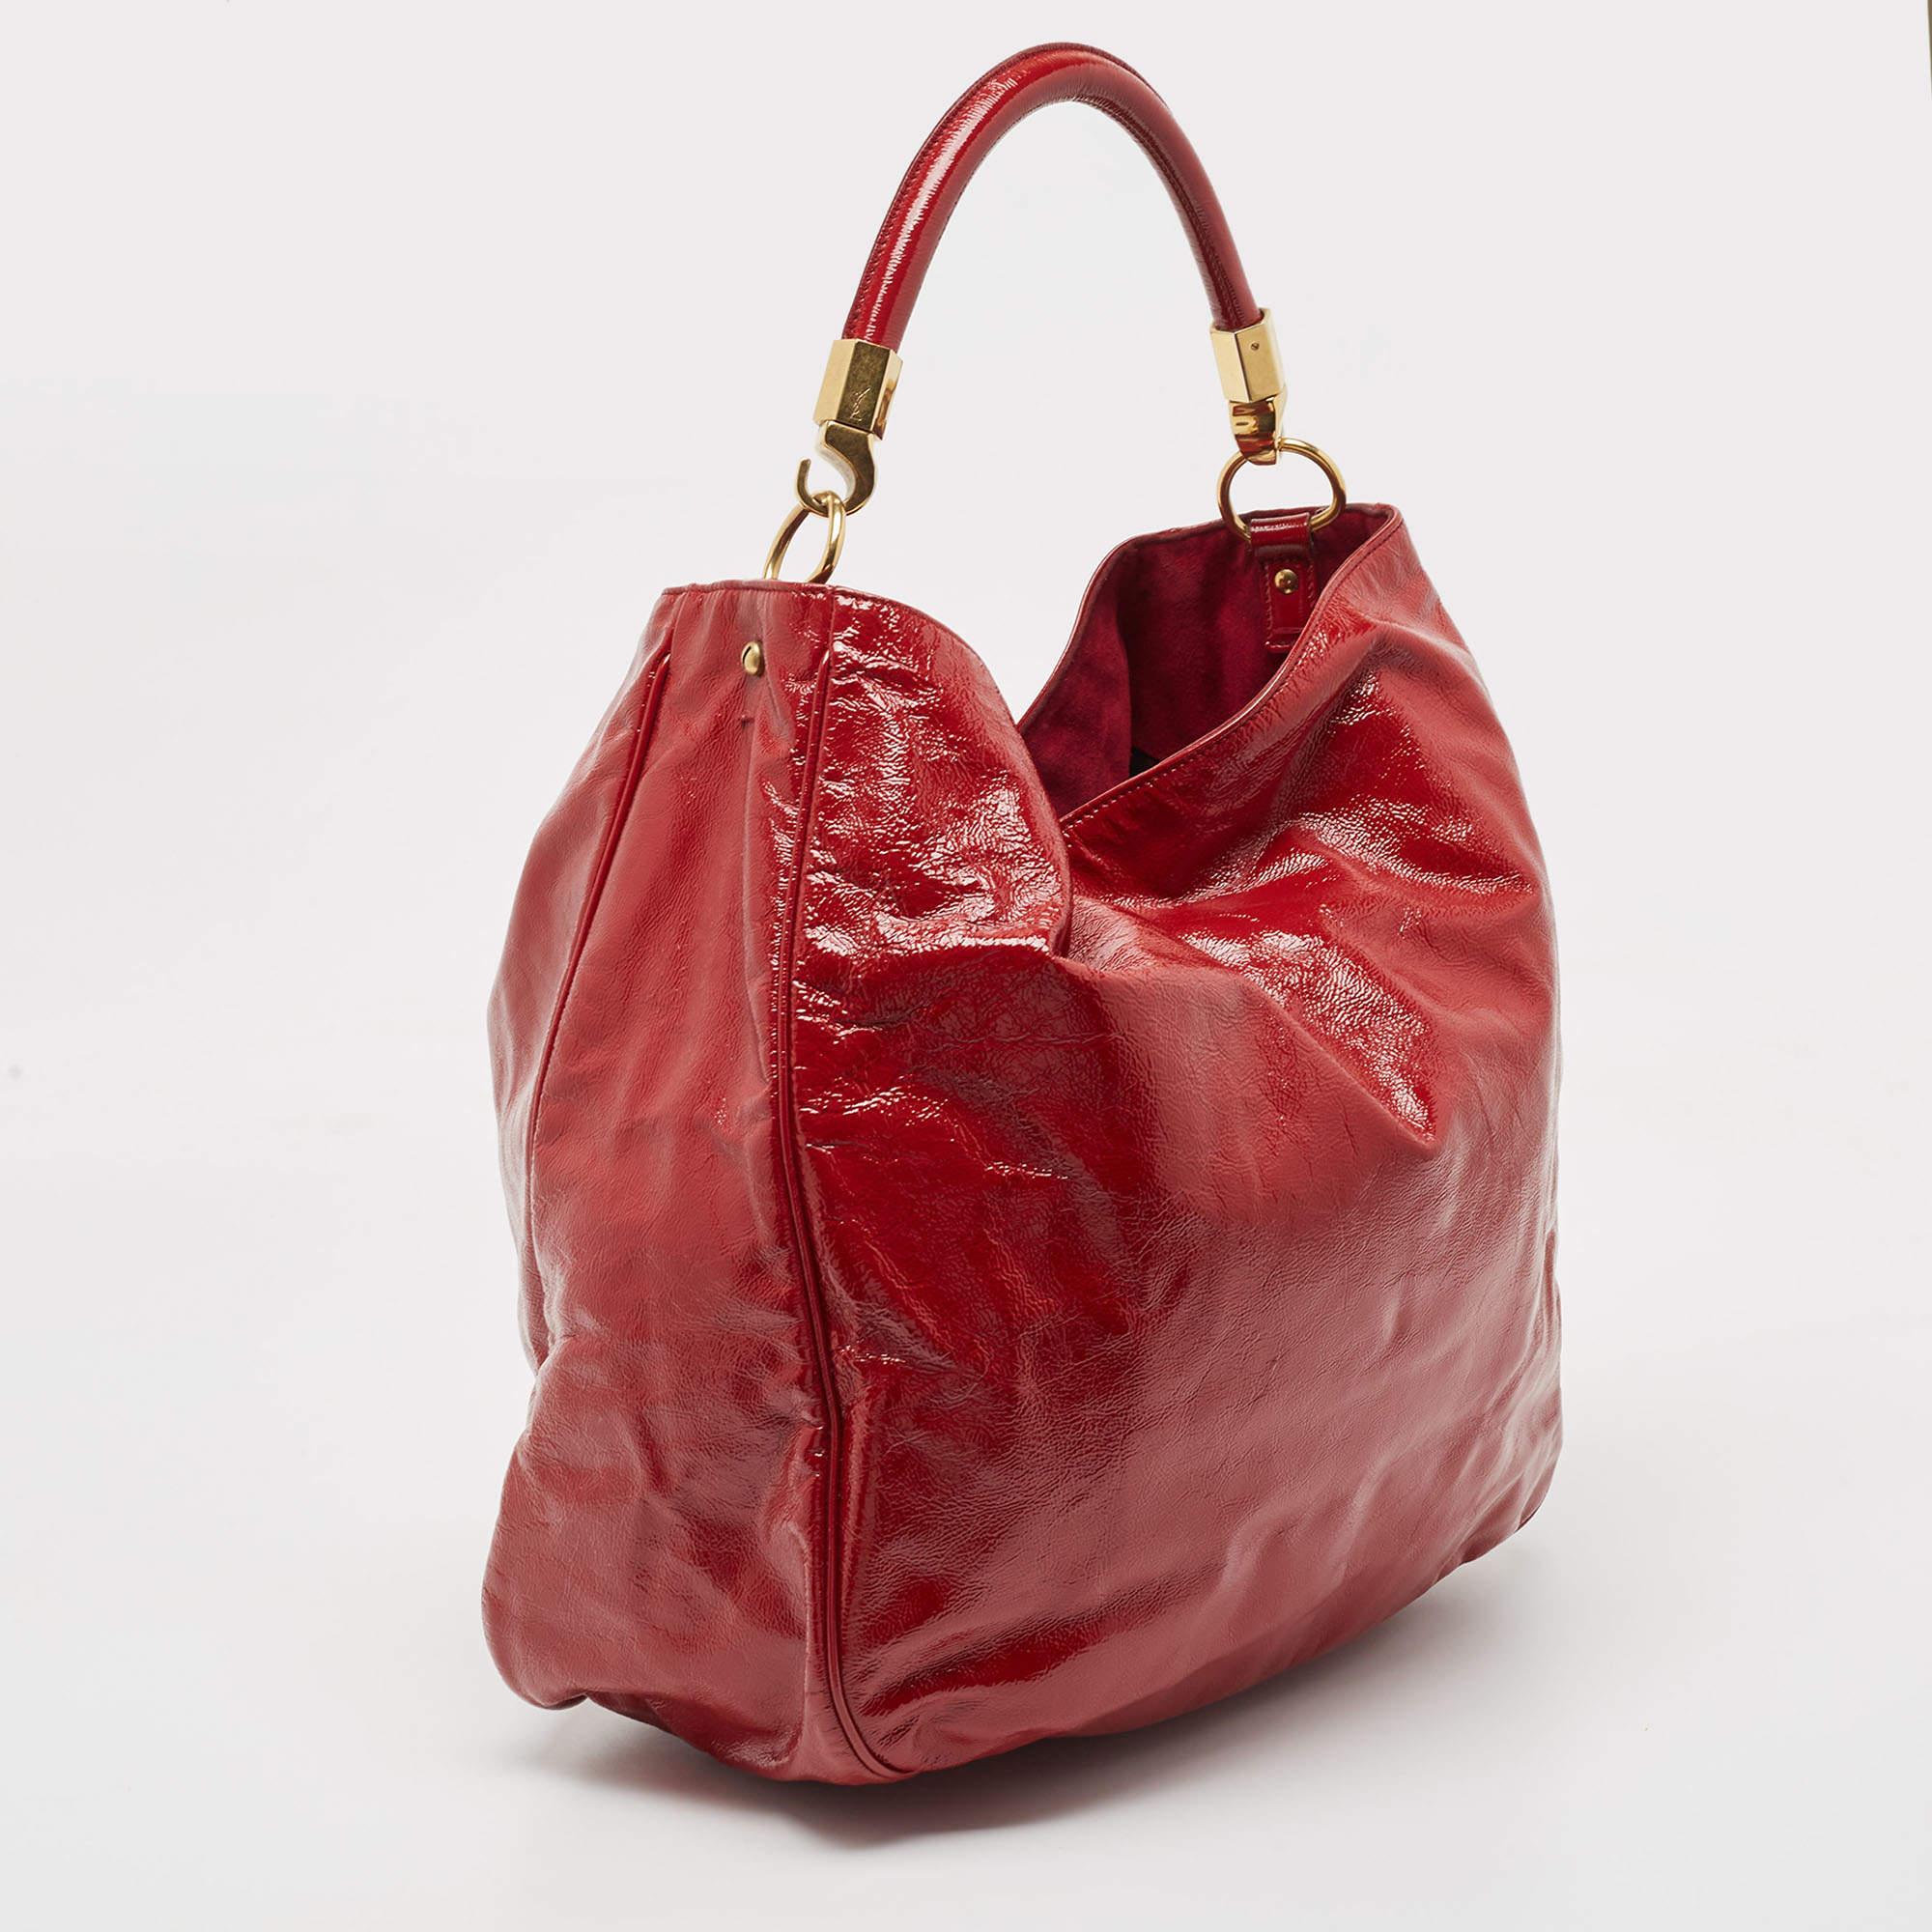 This hobo is tailored to exude finesse and functionality while completing your ensemble with style. It features a well-crafted exterior adorned in a lovely hue and a spacious interior. Add some extra style to your everyday looks with this marvelous